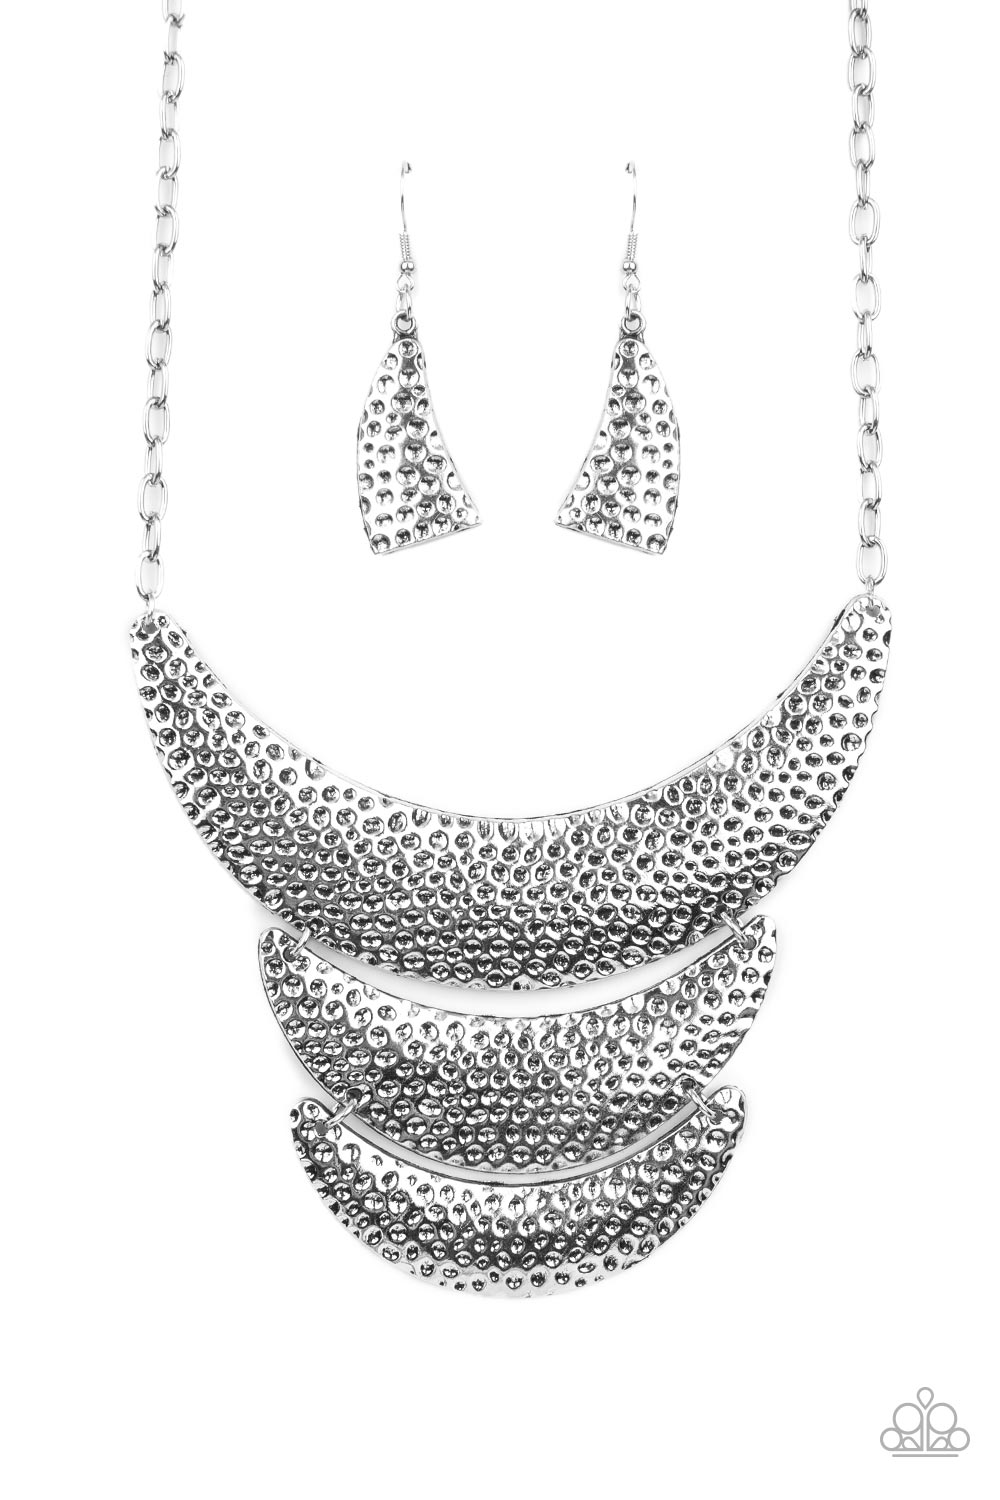 Moonwalk Magic - Silver Necklaces hammered in an antiqued silver dimpled texture, a trio of crescent shaped plates in graduating sizes stack one above the other and connect to a silver chain for a boldly modern fashion below the collar. Features an adjustable clasp closure.  Sold as one individual necklace. Includes one pair of matching earrings.  Paparazzi Jewelry is lead and nickel free so it's perfect for sensitive skin too!